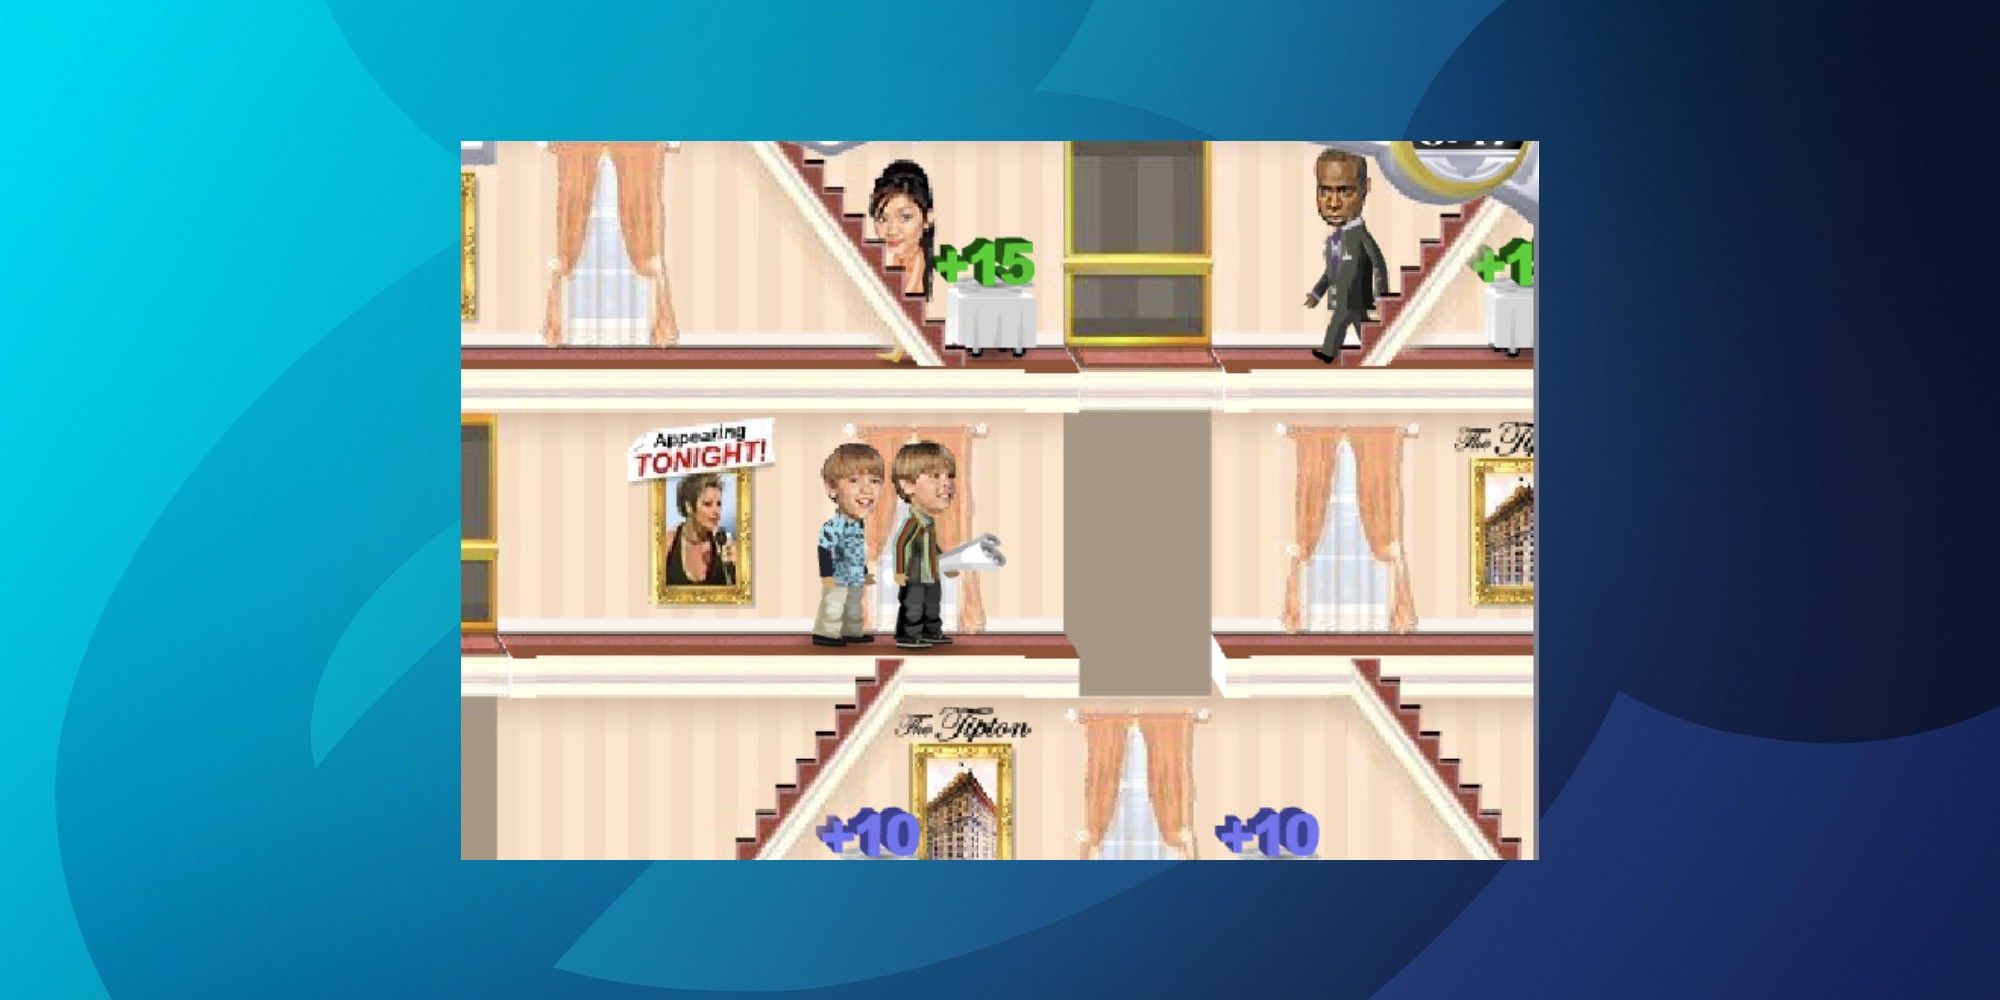 Zack and Cody are standing in the hallway with London and Mr. Moseby in the hallway above them